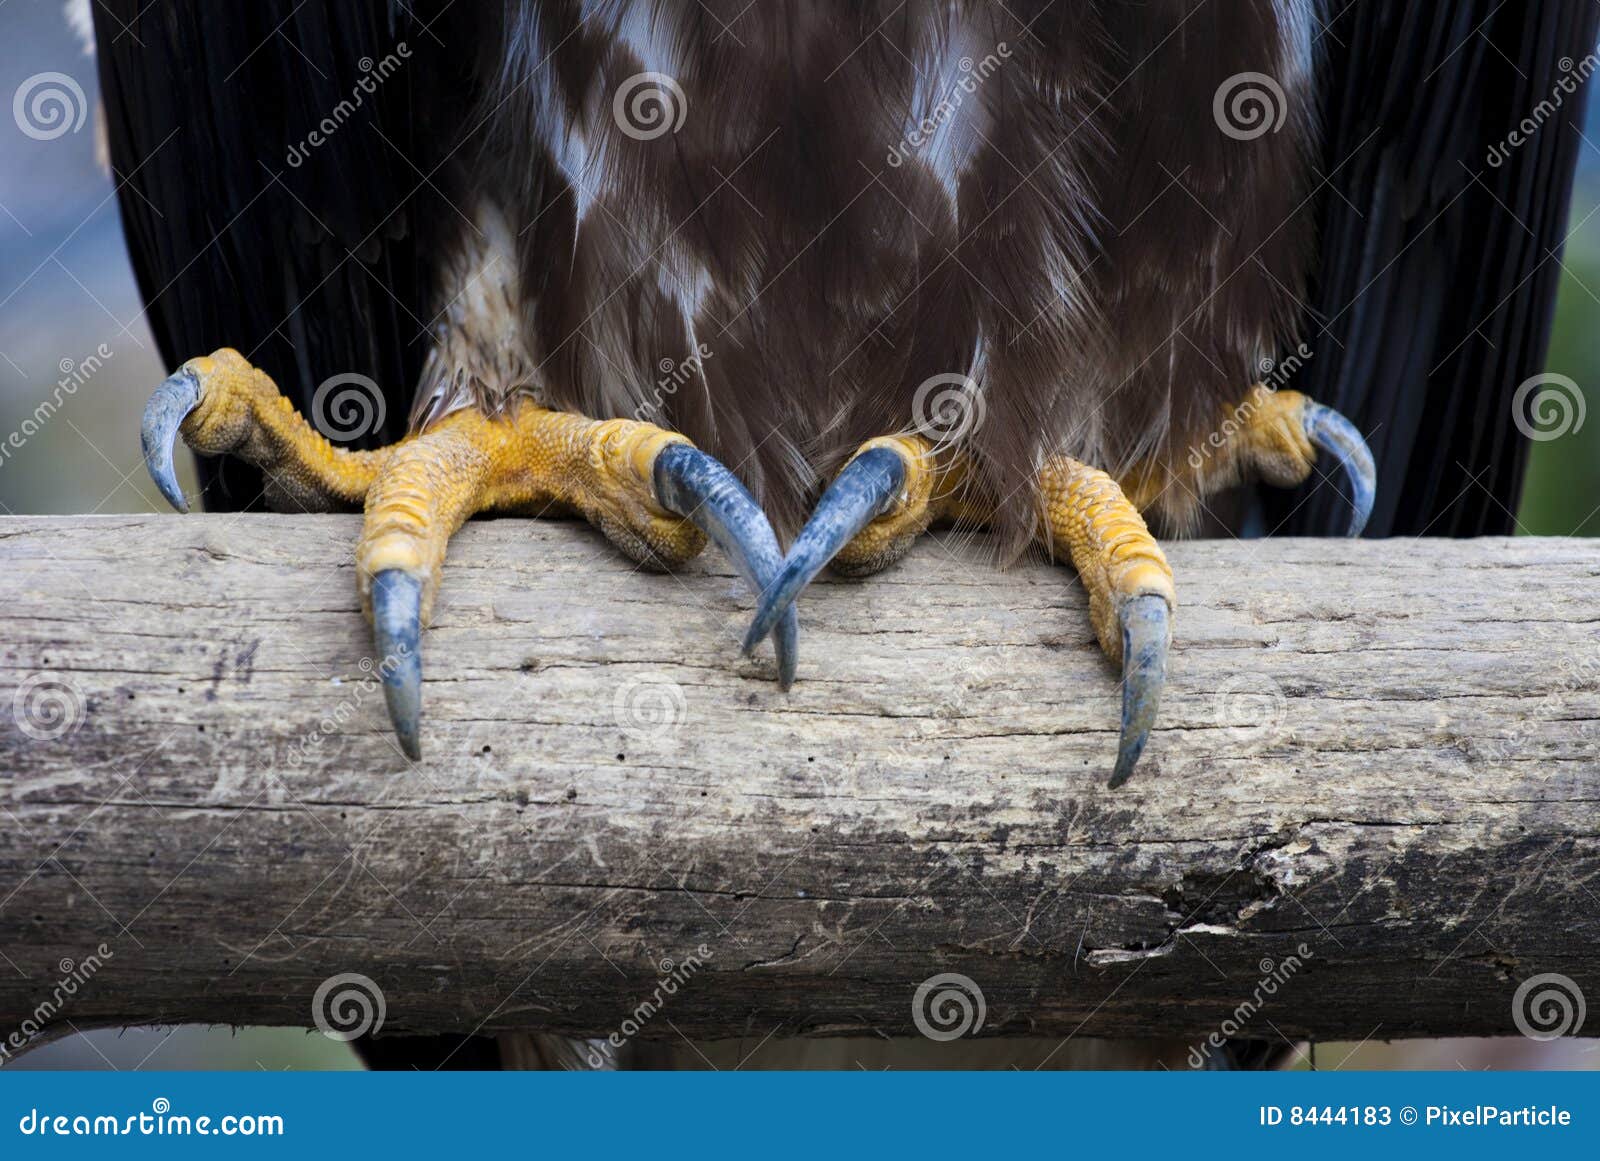 Real Eagle Claws Image & Photo (Free Trial) | Bigstock